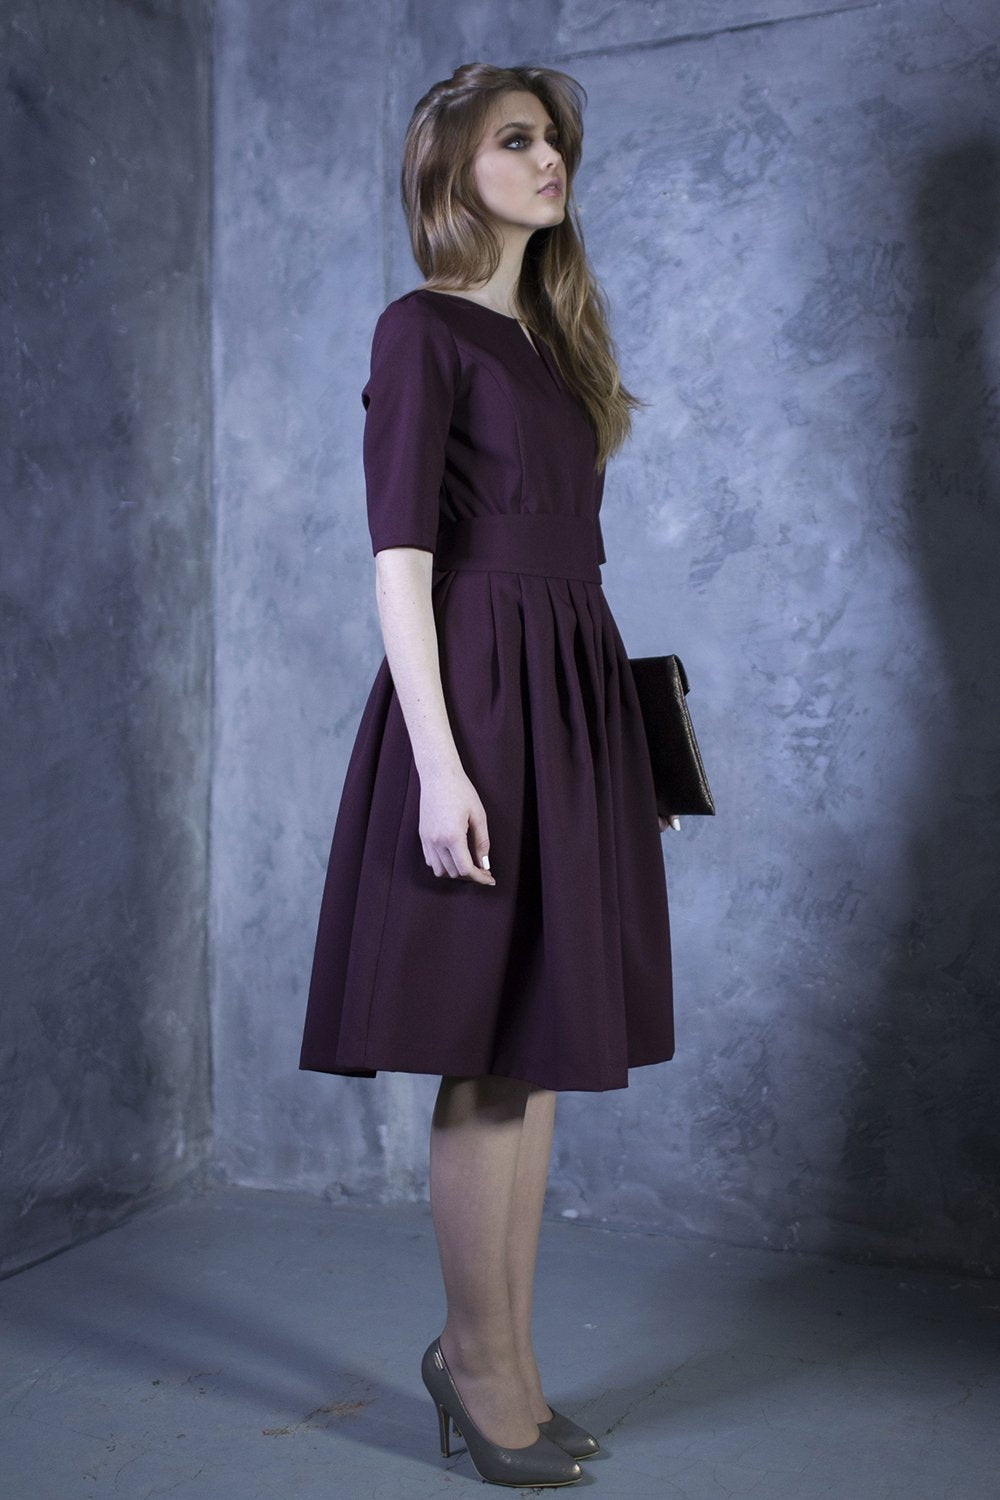 Grape shade dress with pleats. Golden color detail in neckline